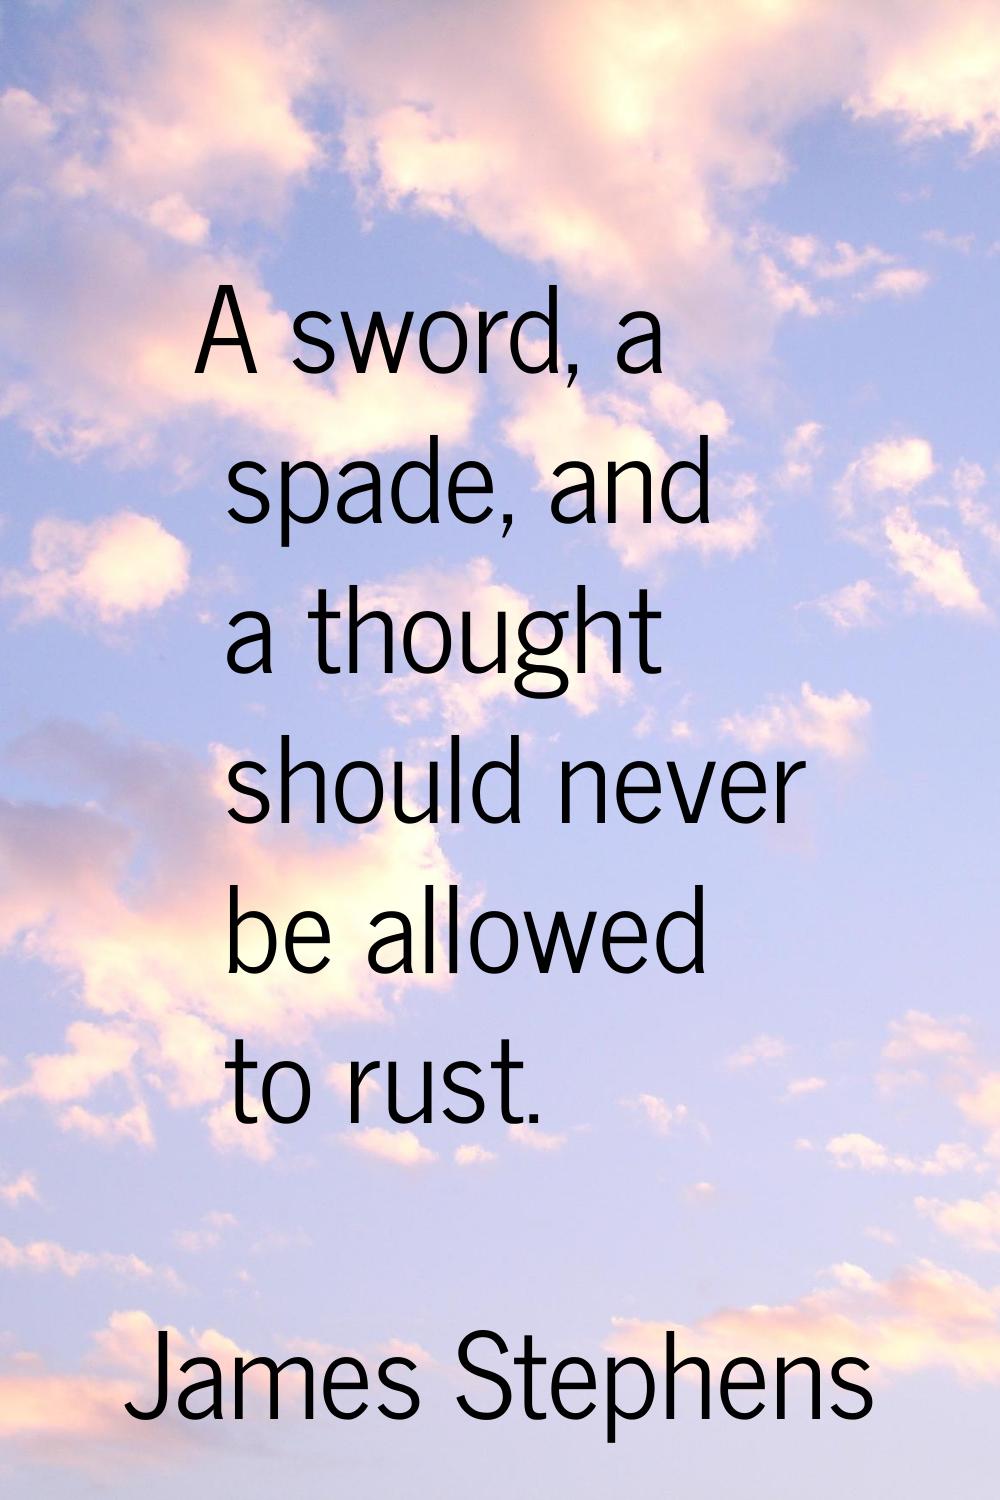 A sword, a spade, and a thought should never be allowed to rust.